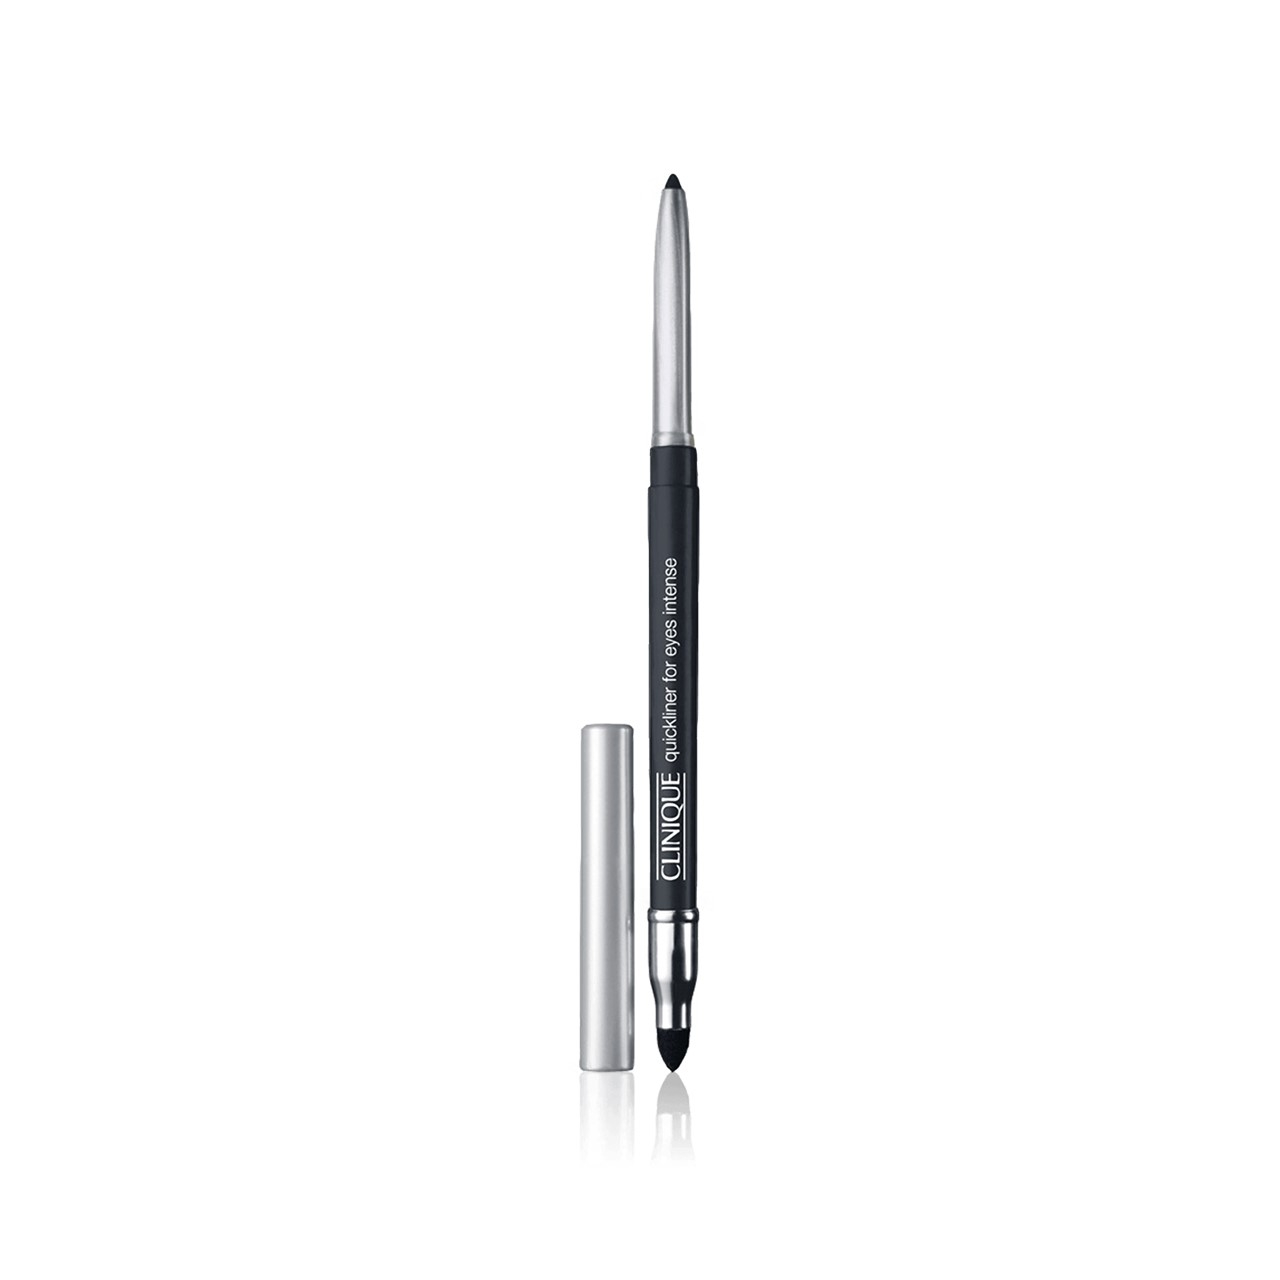 Clinique Quickliner For Eyes Intense Charcoal 0.28g